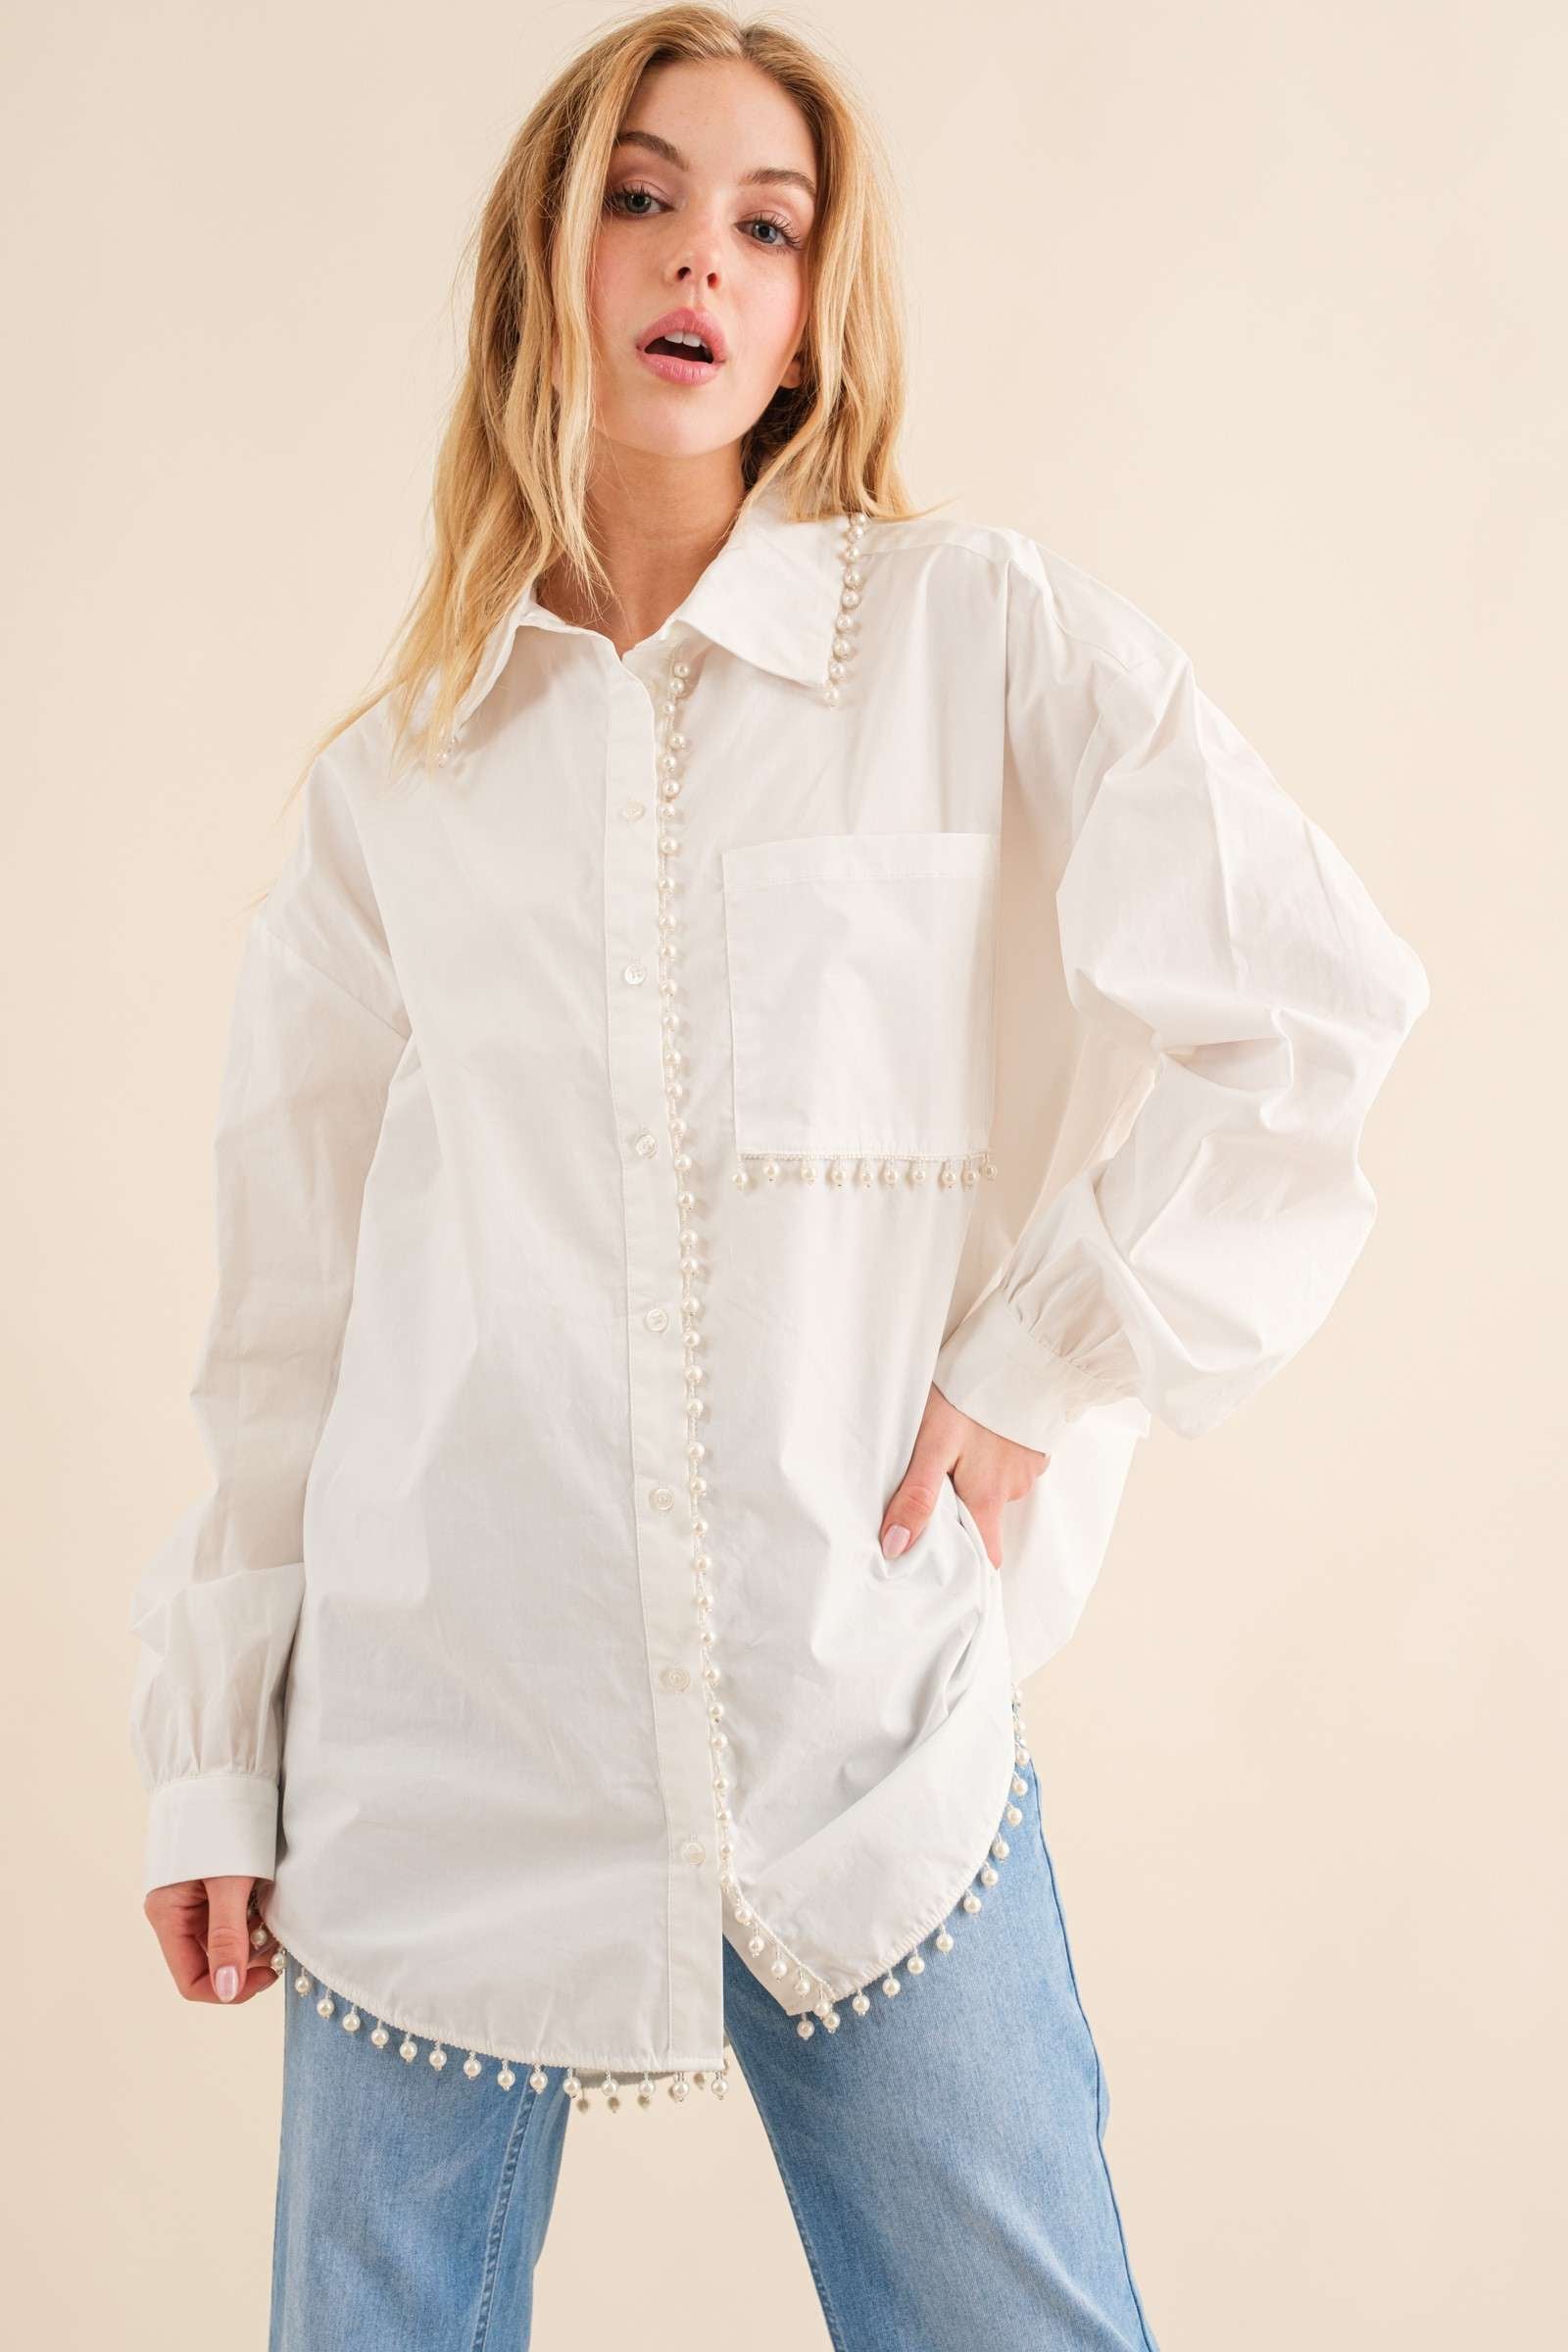 You are Extraordinary Button Down - White